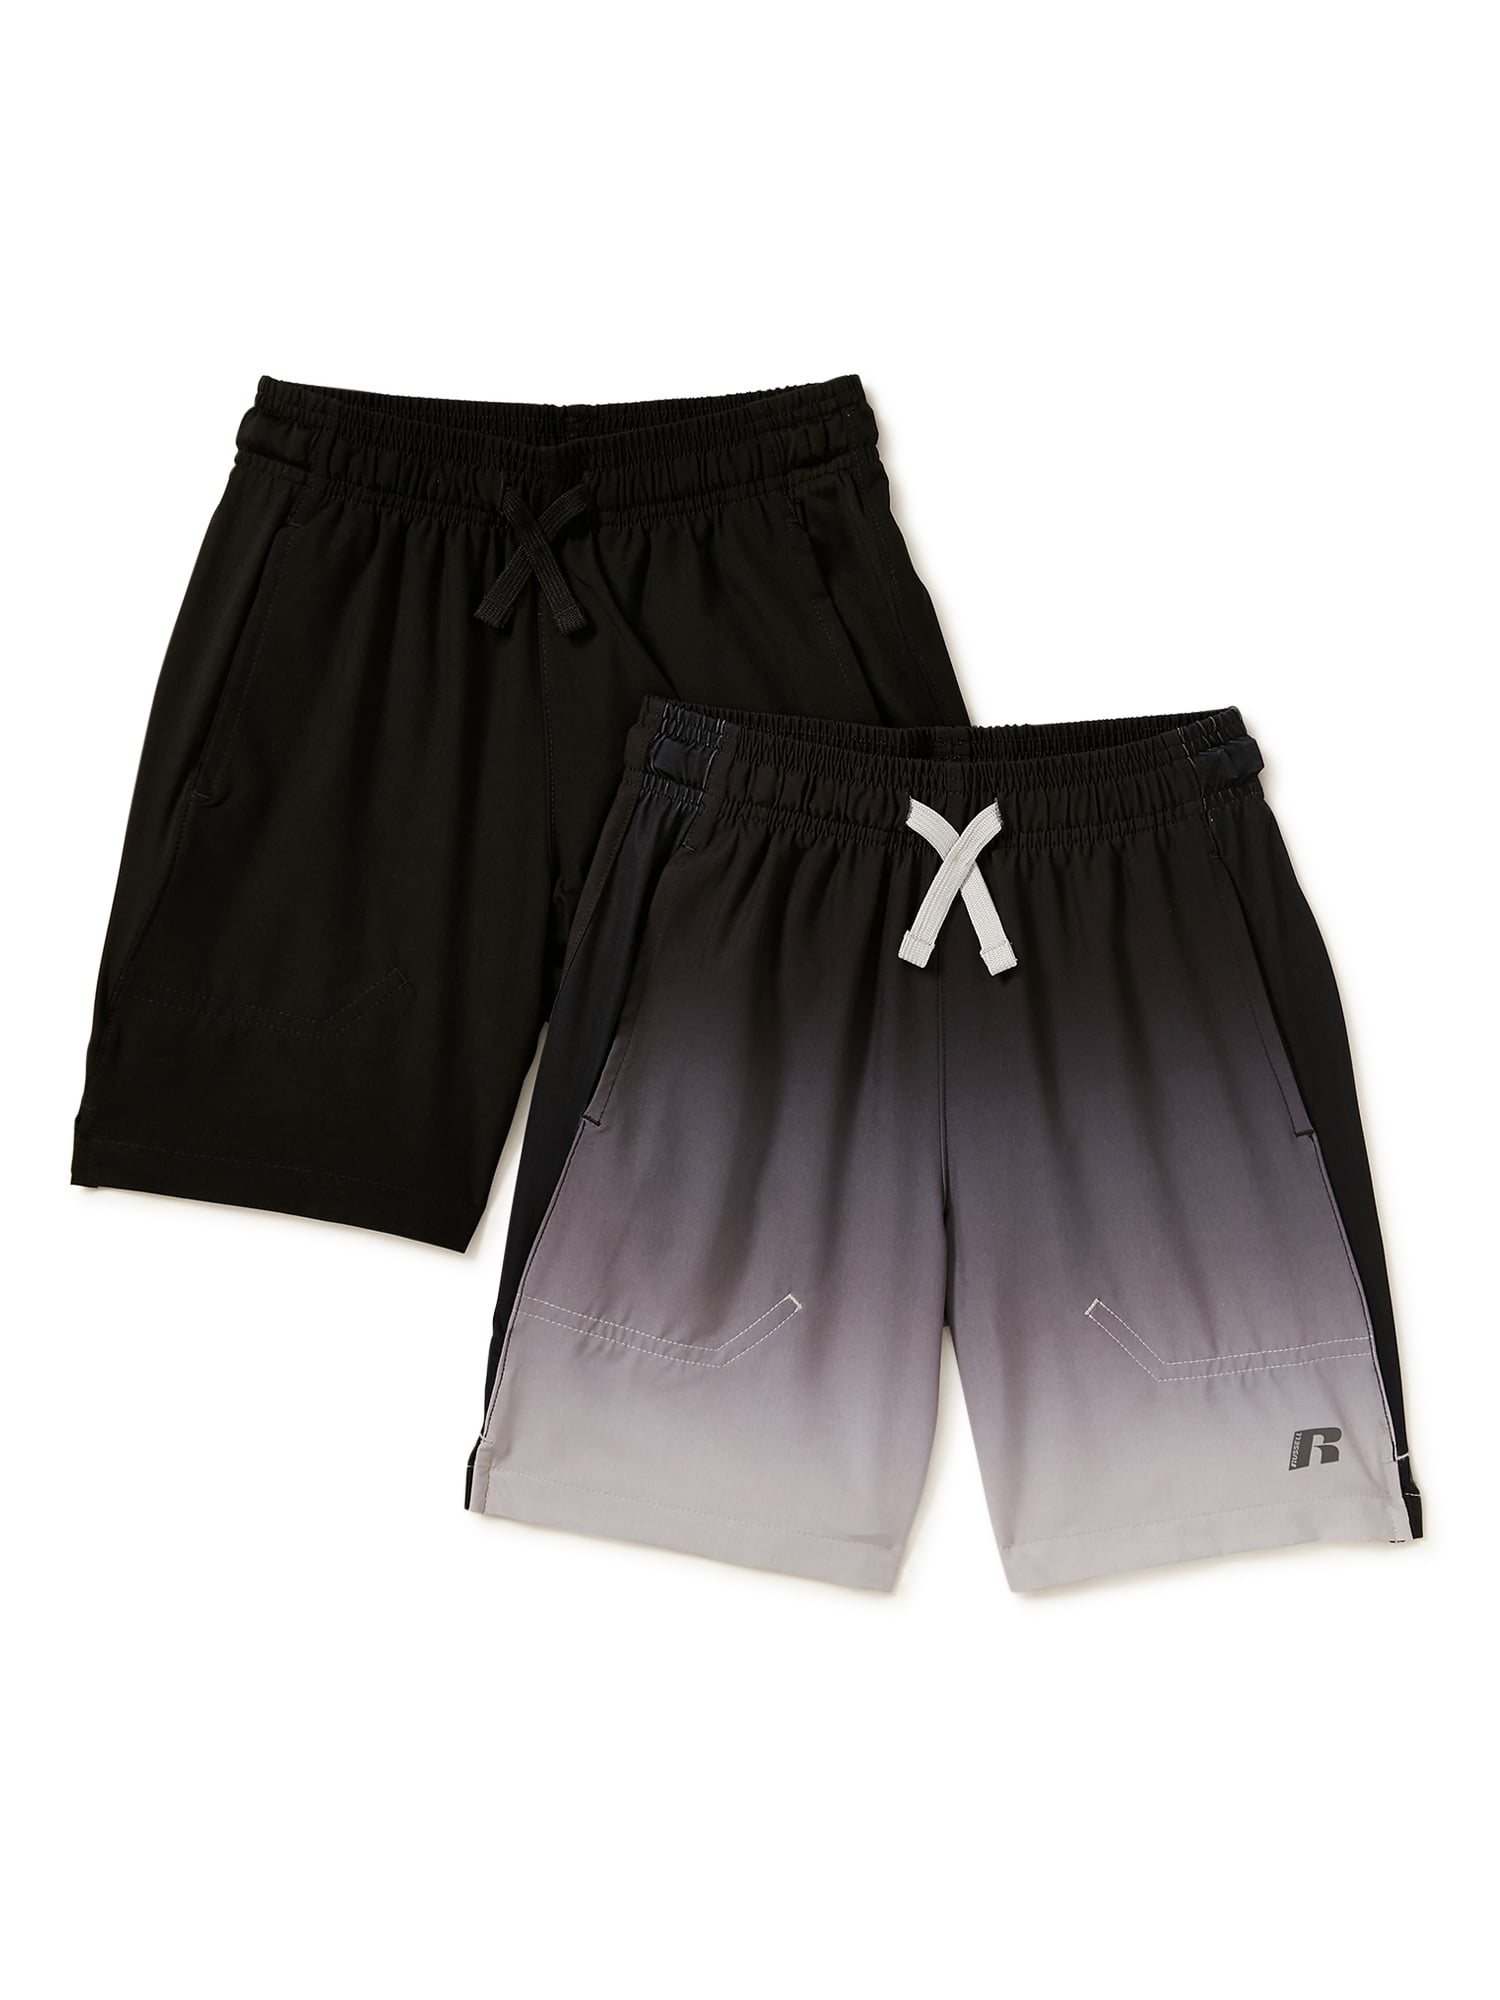 Russell Boys' Athletic Performance Shorts, 2-Pack, Sizes 4-18 & Husky 